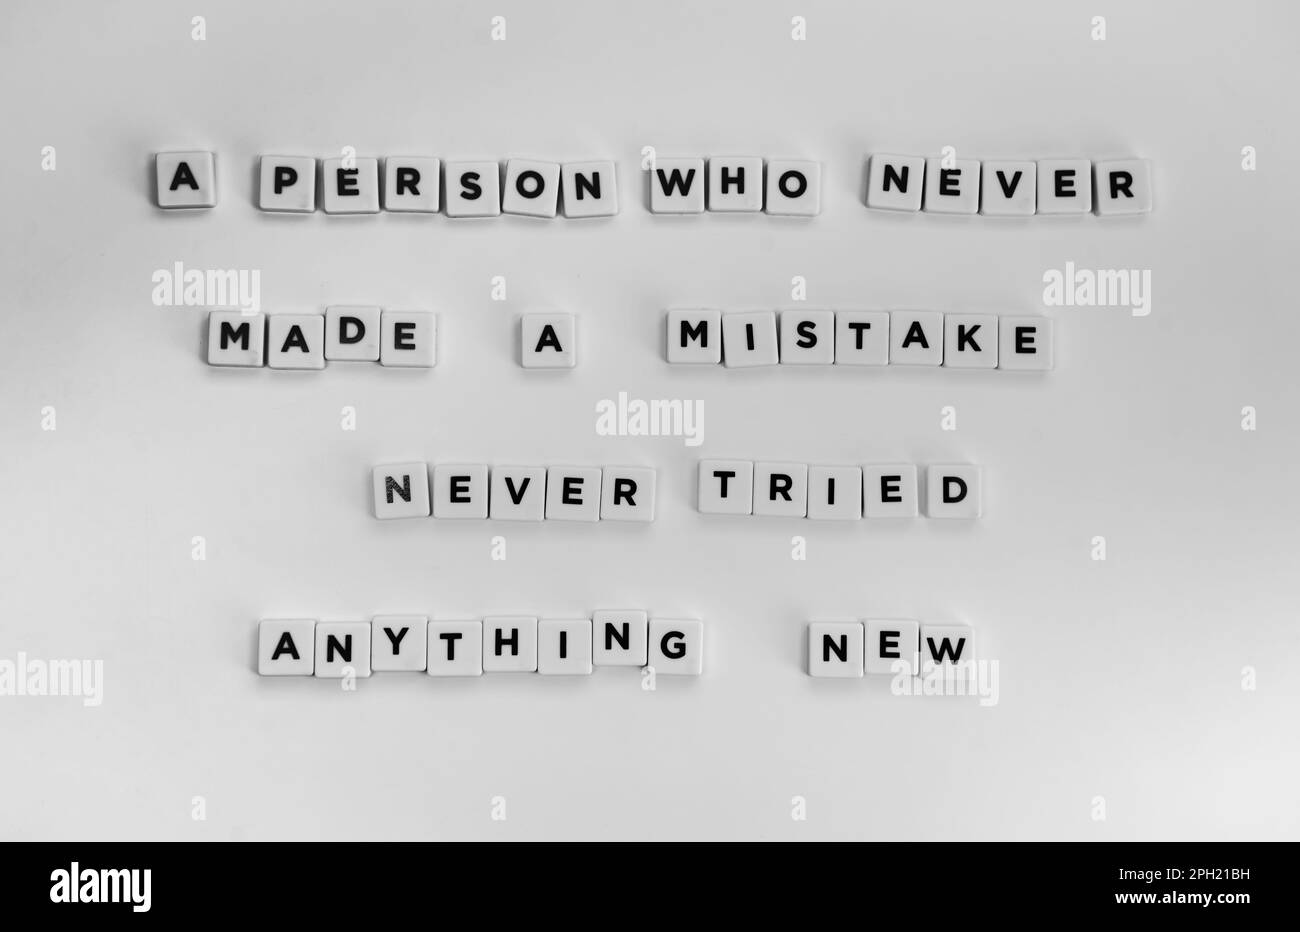 A deep life quote about mistakes written with letter beads on a white surface Stock Photo